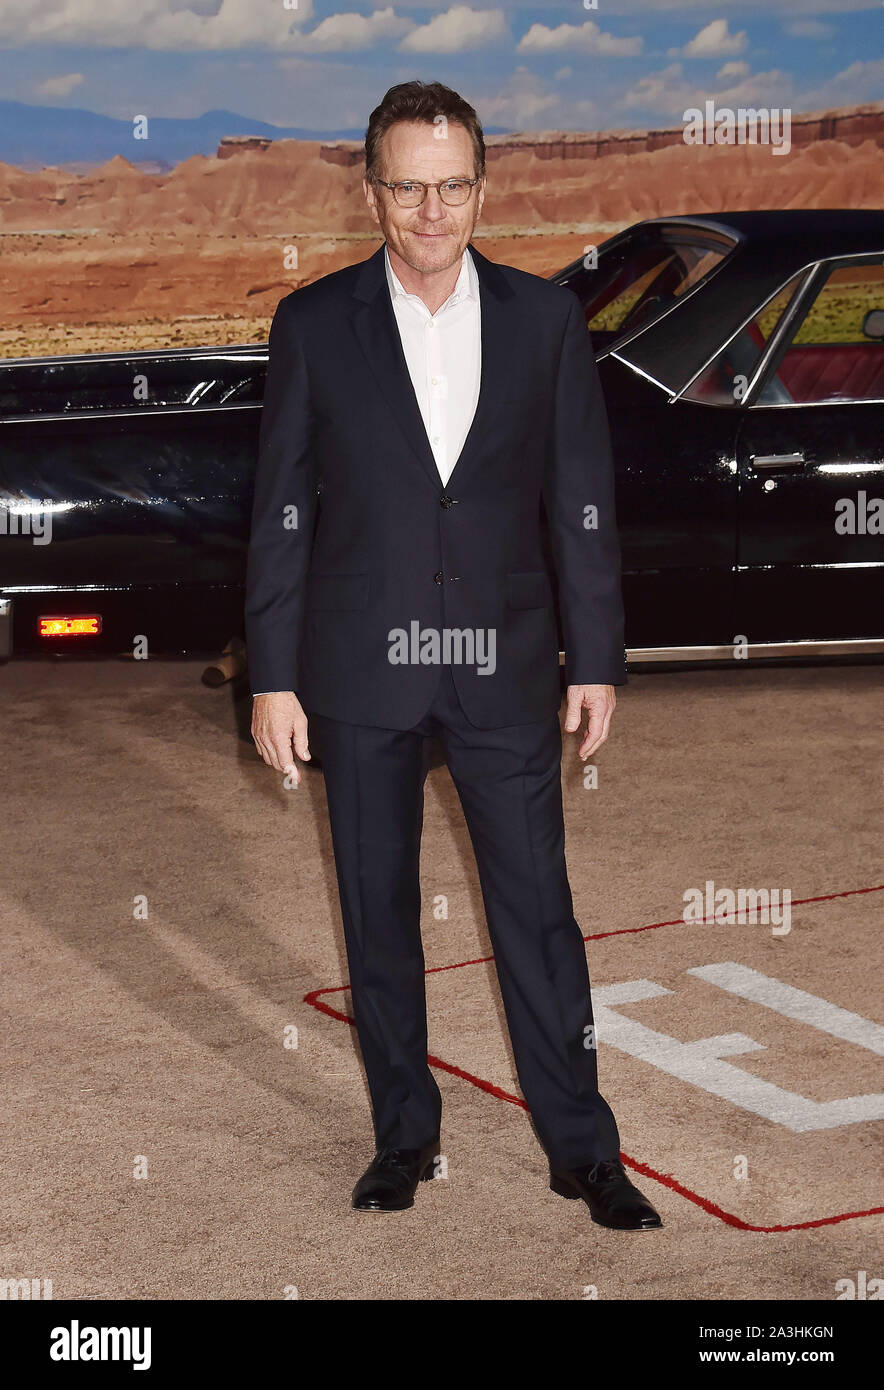 WESTWOOD, CA - OCTOBER 07: Bryan Cranston attends the premiere of Netflix's 'El Camino: A Breaking Bad Movie' at Regency Village Theatre on October 07, 2019 in Westwood, California. Stock Photo